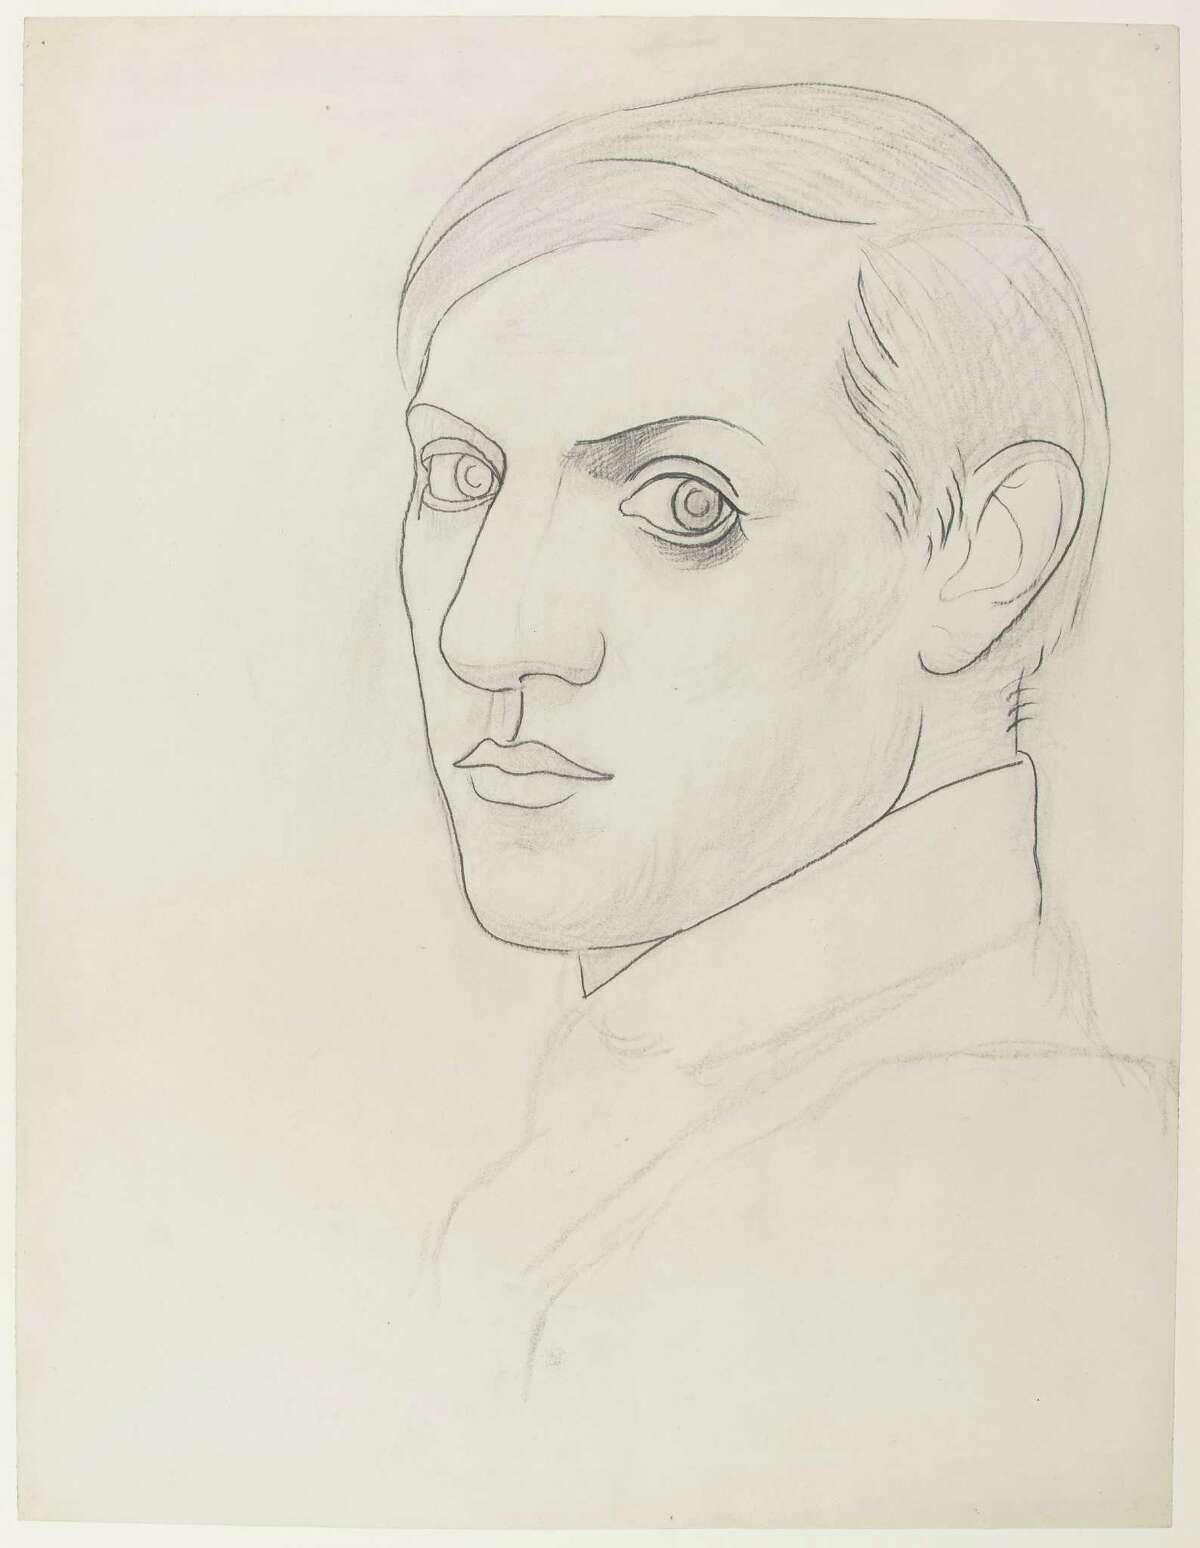 The Menil Collection exhibition also includes a charcoal-and-graphite self-portrait completed from 1917-19.